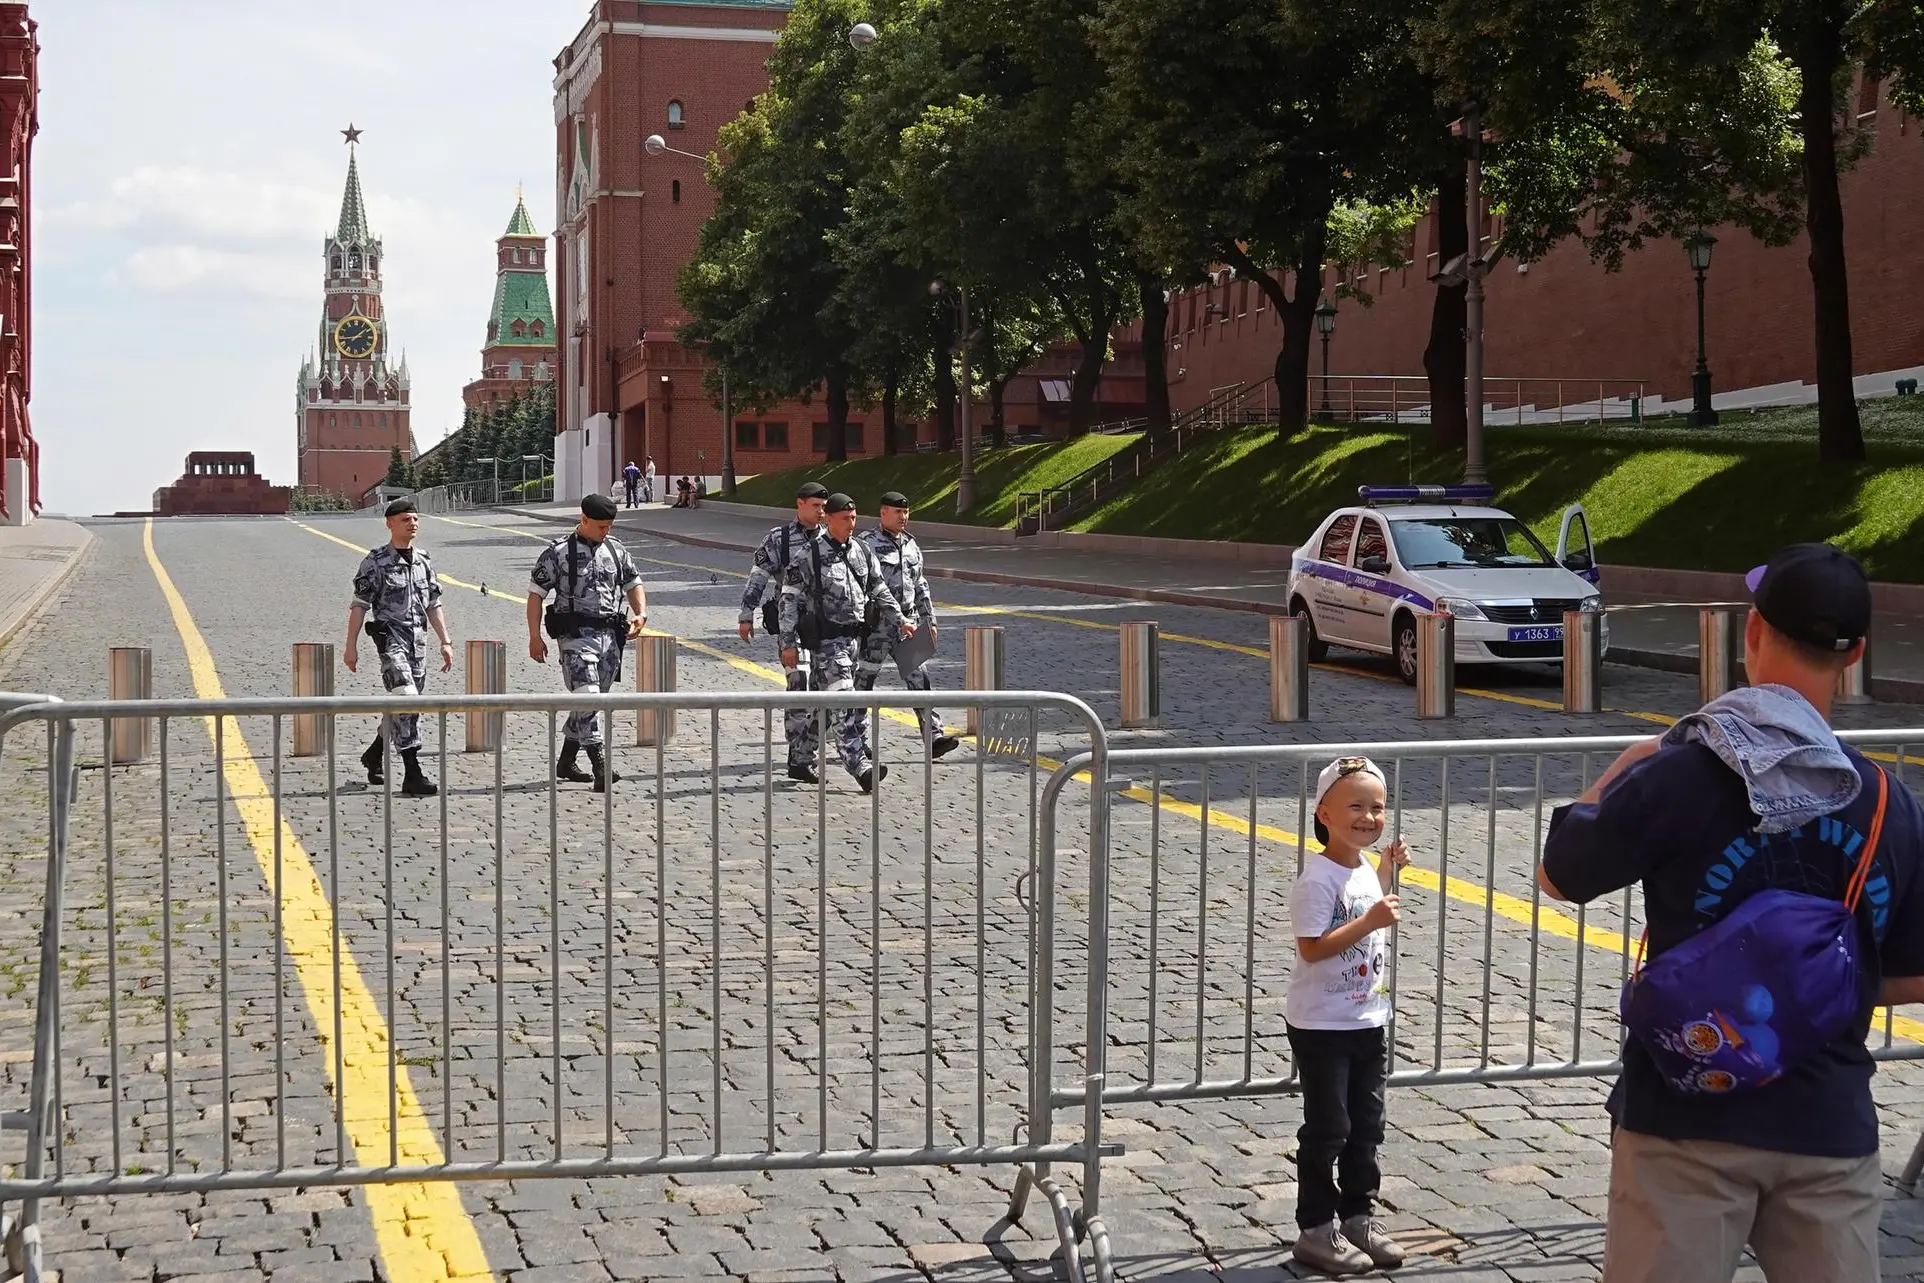 epa10710717 People at a barrier blocking the way to the Red Square in Moscow, Russia, 25 June 2023. On 24 June, counter-terrorism measures were enforced in Moscow and other Russian regions after private military company (PMC) Wagner Group's chief claimed that his troops had occupied the building of the headquarters of the Southern Military District in Rostov-on-Don, demanding a meeting with Russia's defense chiefs. Belarusian President Lukashenko, a close ally of Putin, negotiated a deal with Wagner chief Prigozhin to stop the movement of the group's fighters across Russia, the press service of the President of Belarus reported. The negotiations were said to have lasted for the entire day. Prigozhin announced that Wagner fighters were turning their columns around and going back in the other direction, returning to their field camps. EPA/MAXIM SHIPENKOV